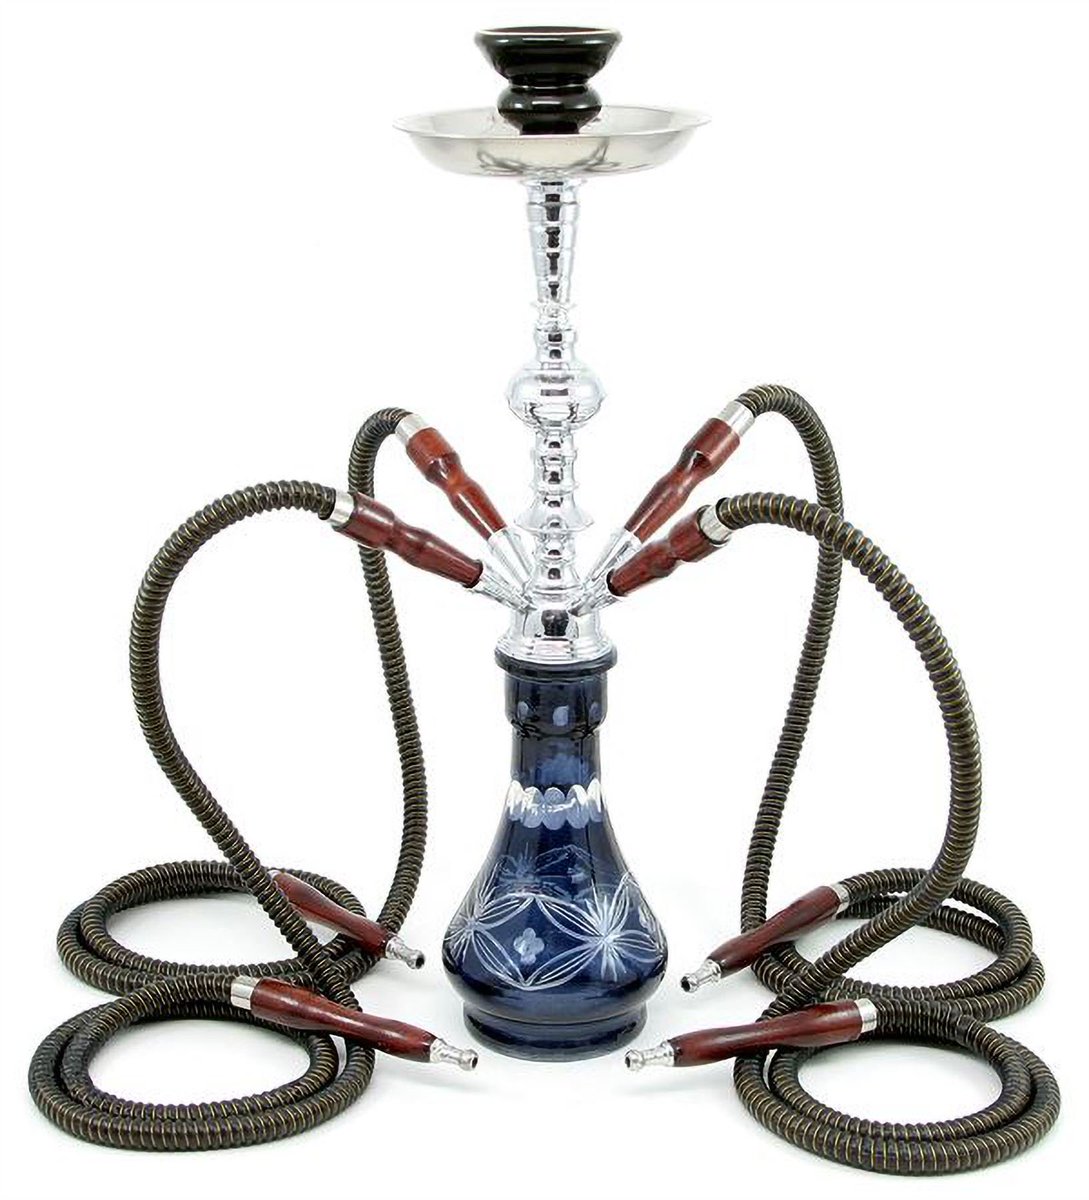 HOOKAH SMOKING IS NOT SAFER THAN CIGARETTE SMOKING!‘An hour smoking of HOOKAH is approximately 200puffs and 900mls of smoke is inhaled! Whereas cigarette smoking on average is 20puffs to 600mls!’ (CDC, 2020).Pls RT